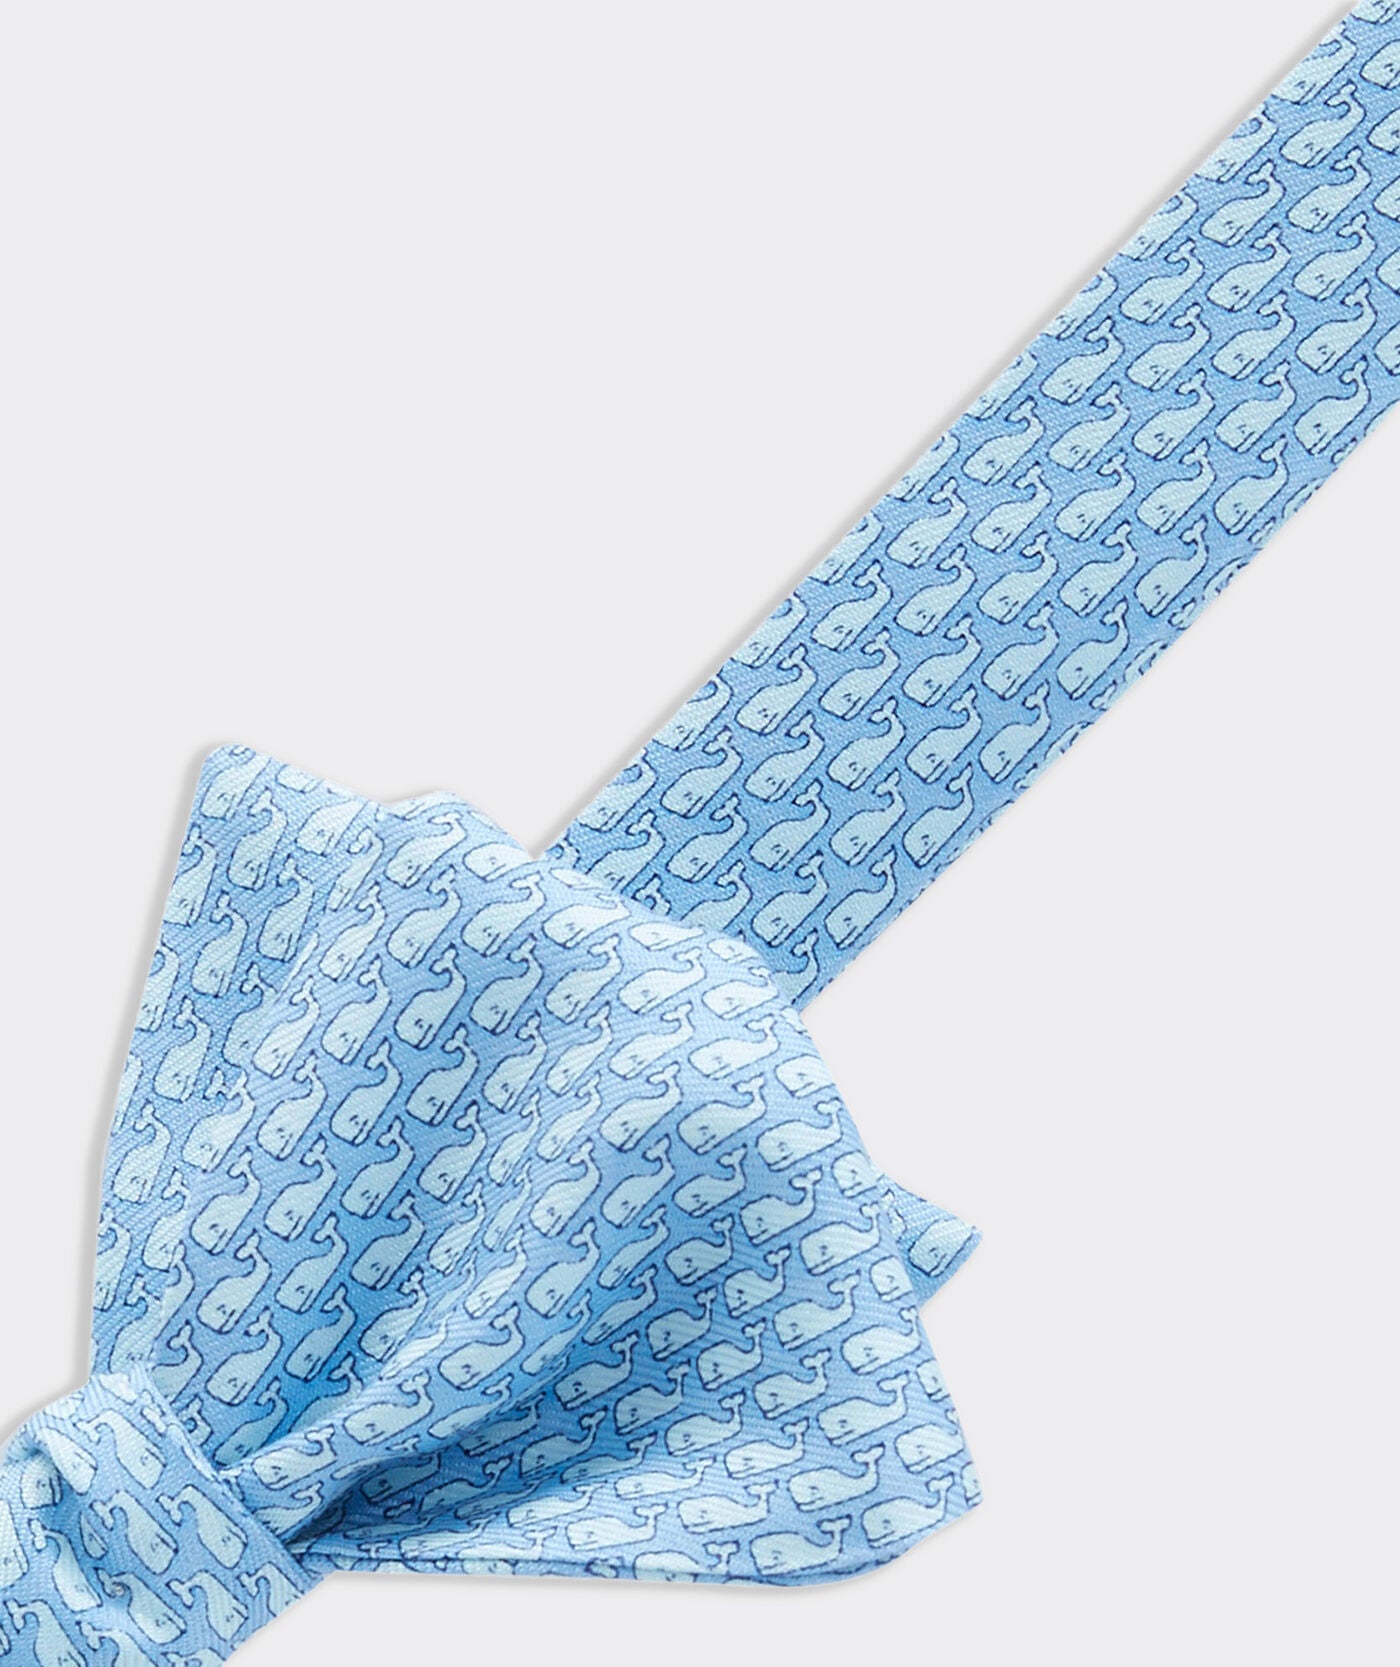 Vineyard Vines Fly Fishing Fly Bow Tie (Blue)